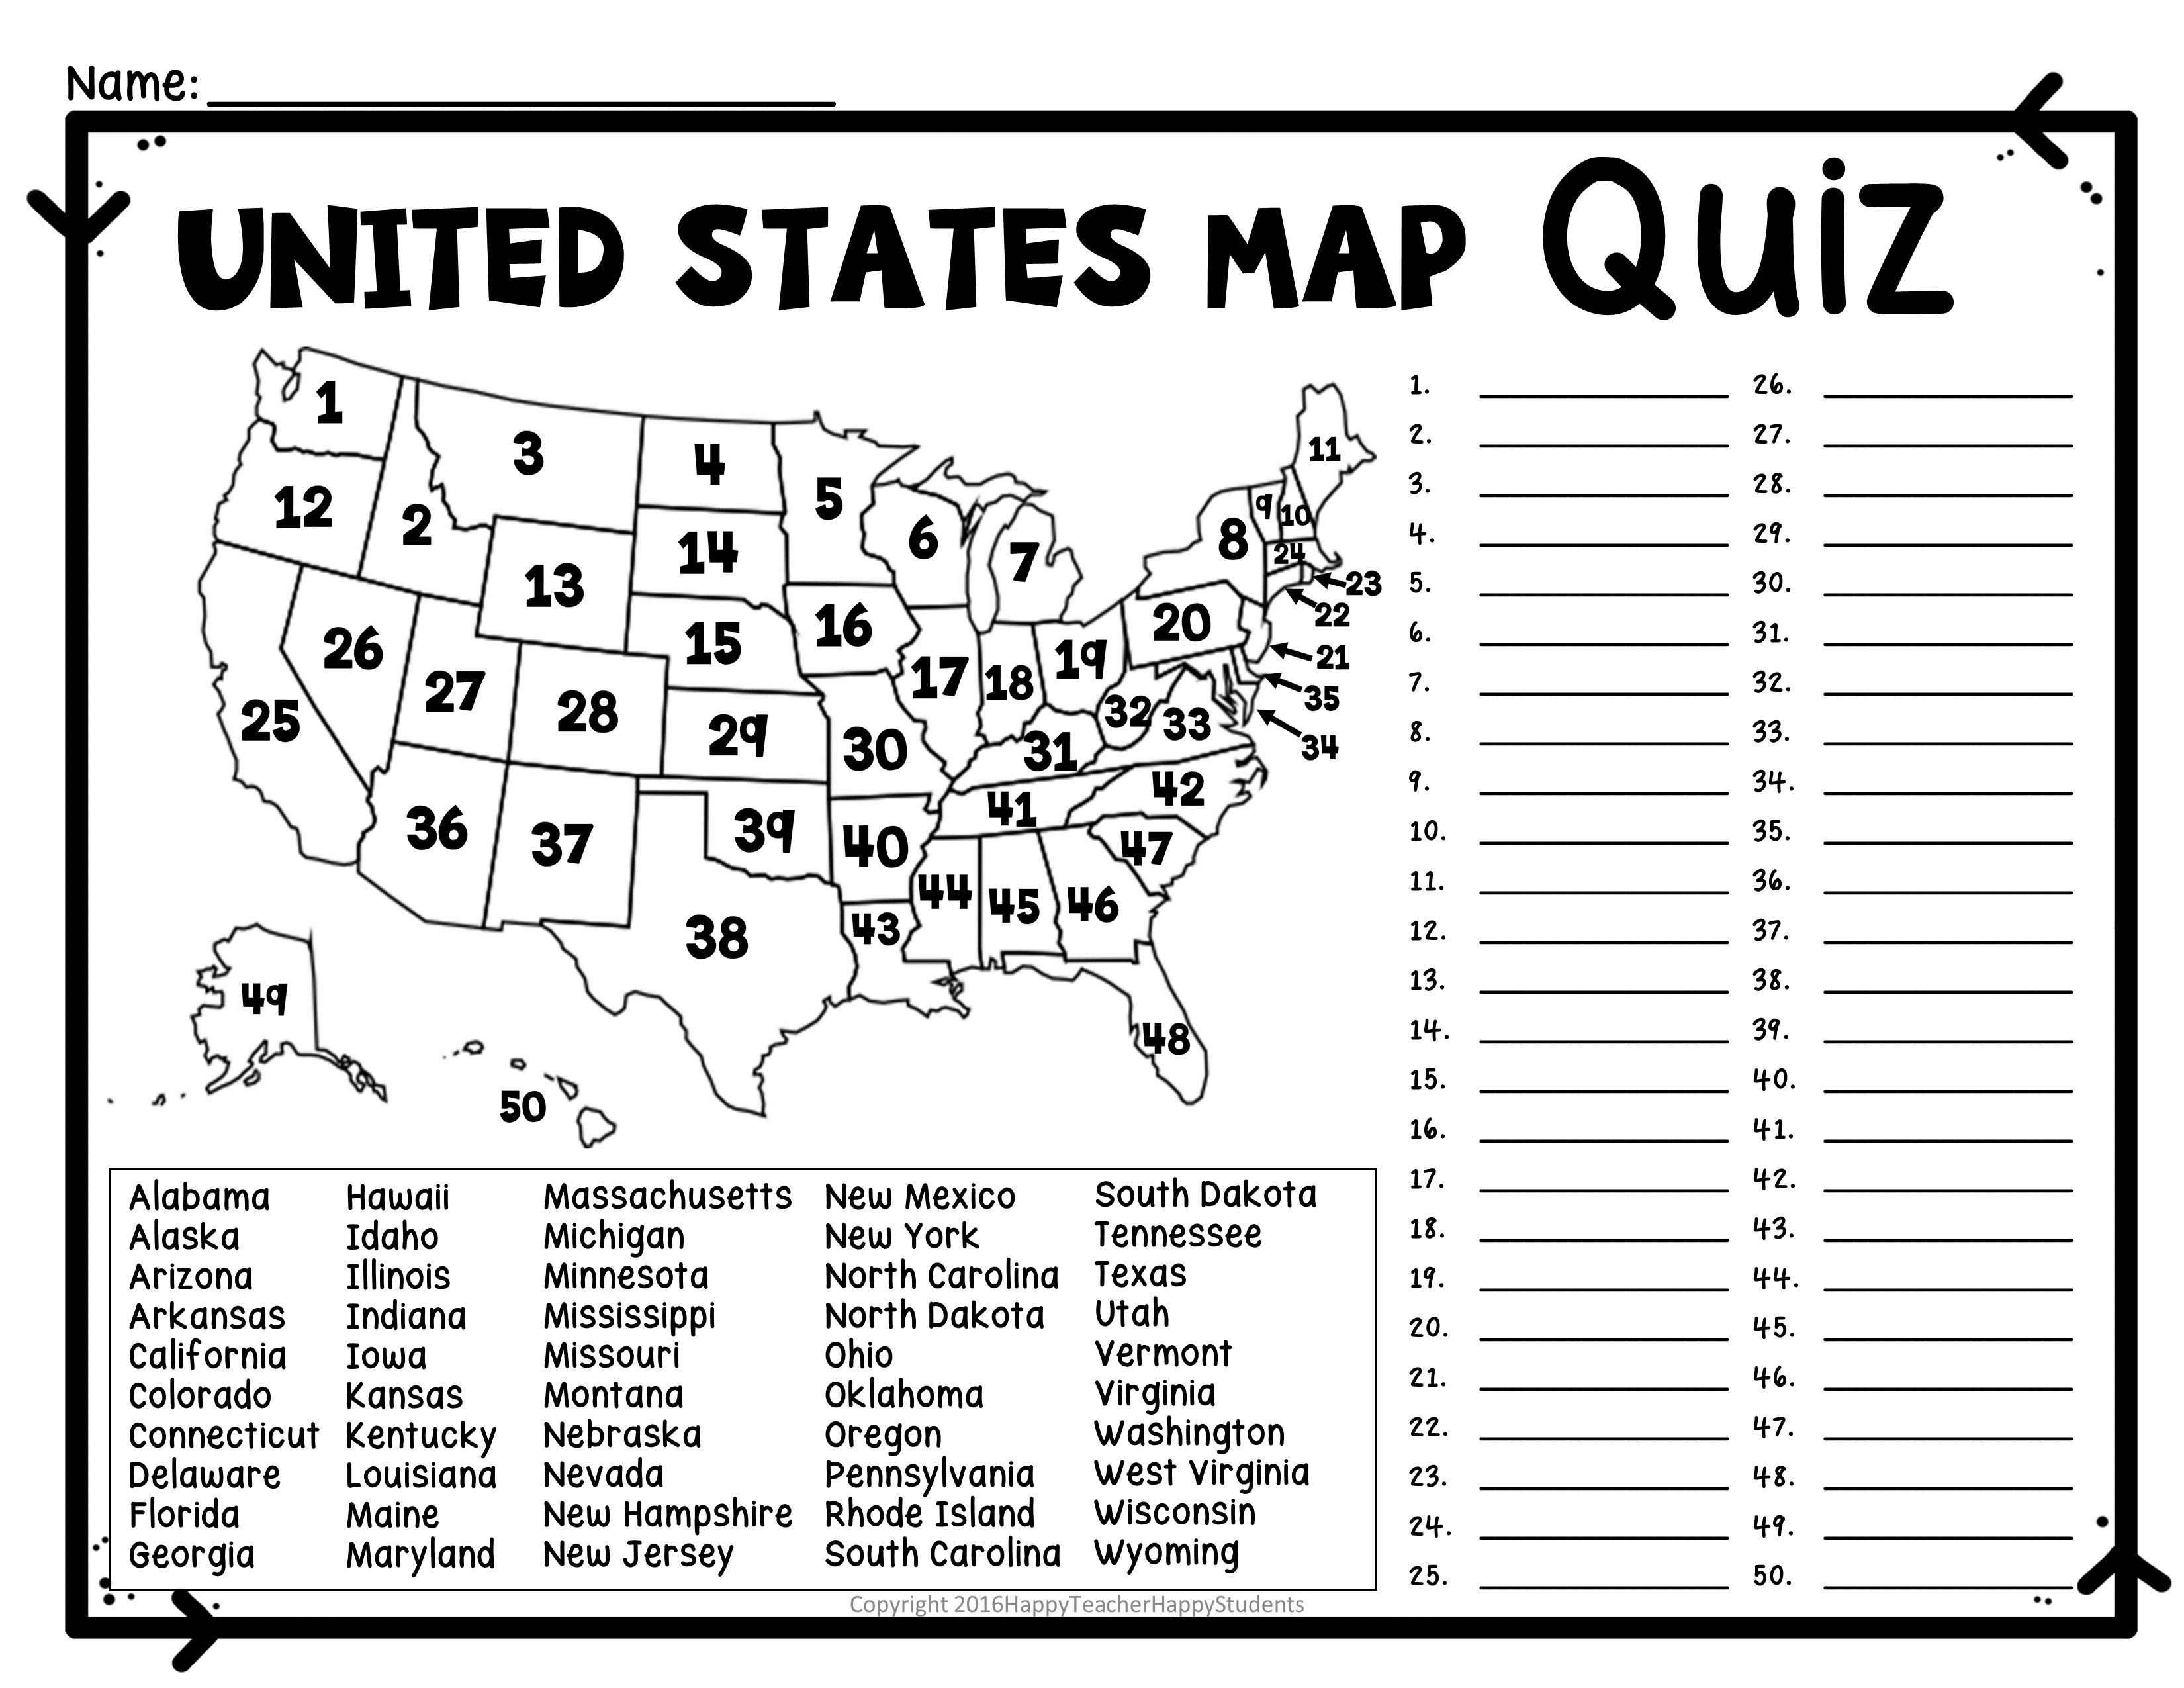 State Capitals Crossword 15 States And Capitals Puzzle - Printable 50 States Crossword Puzzles